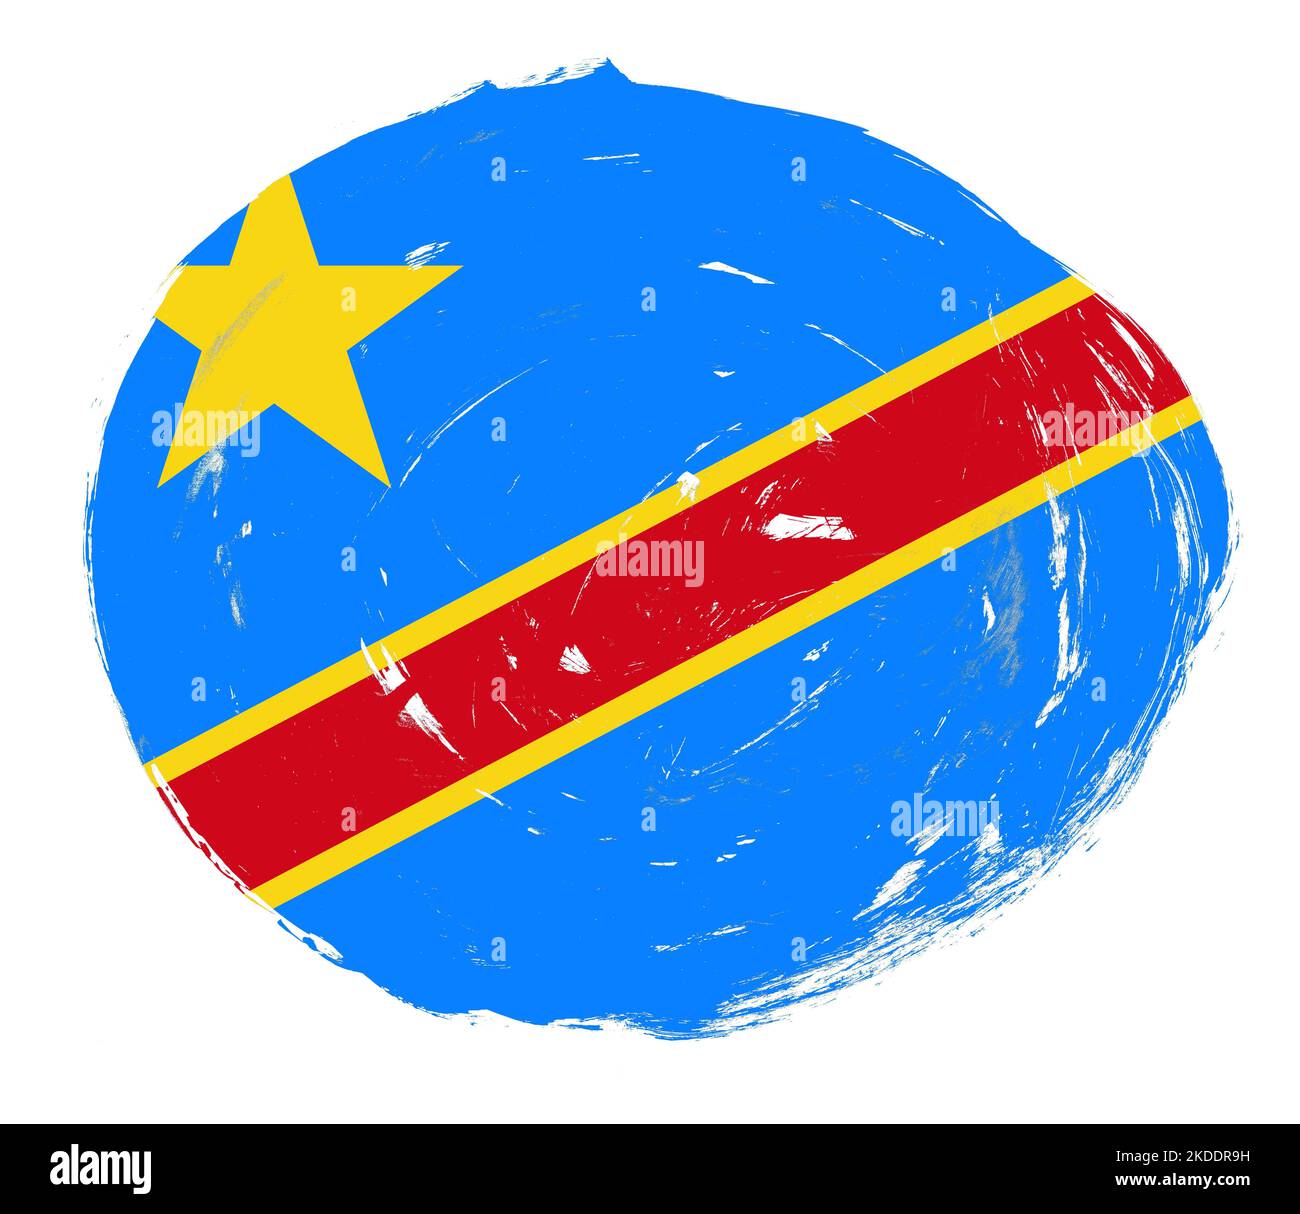 Democratic republic of congo flag hi-res stock photography and images -  Alamy